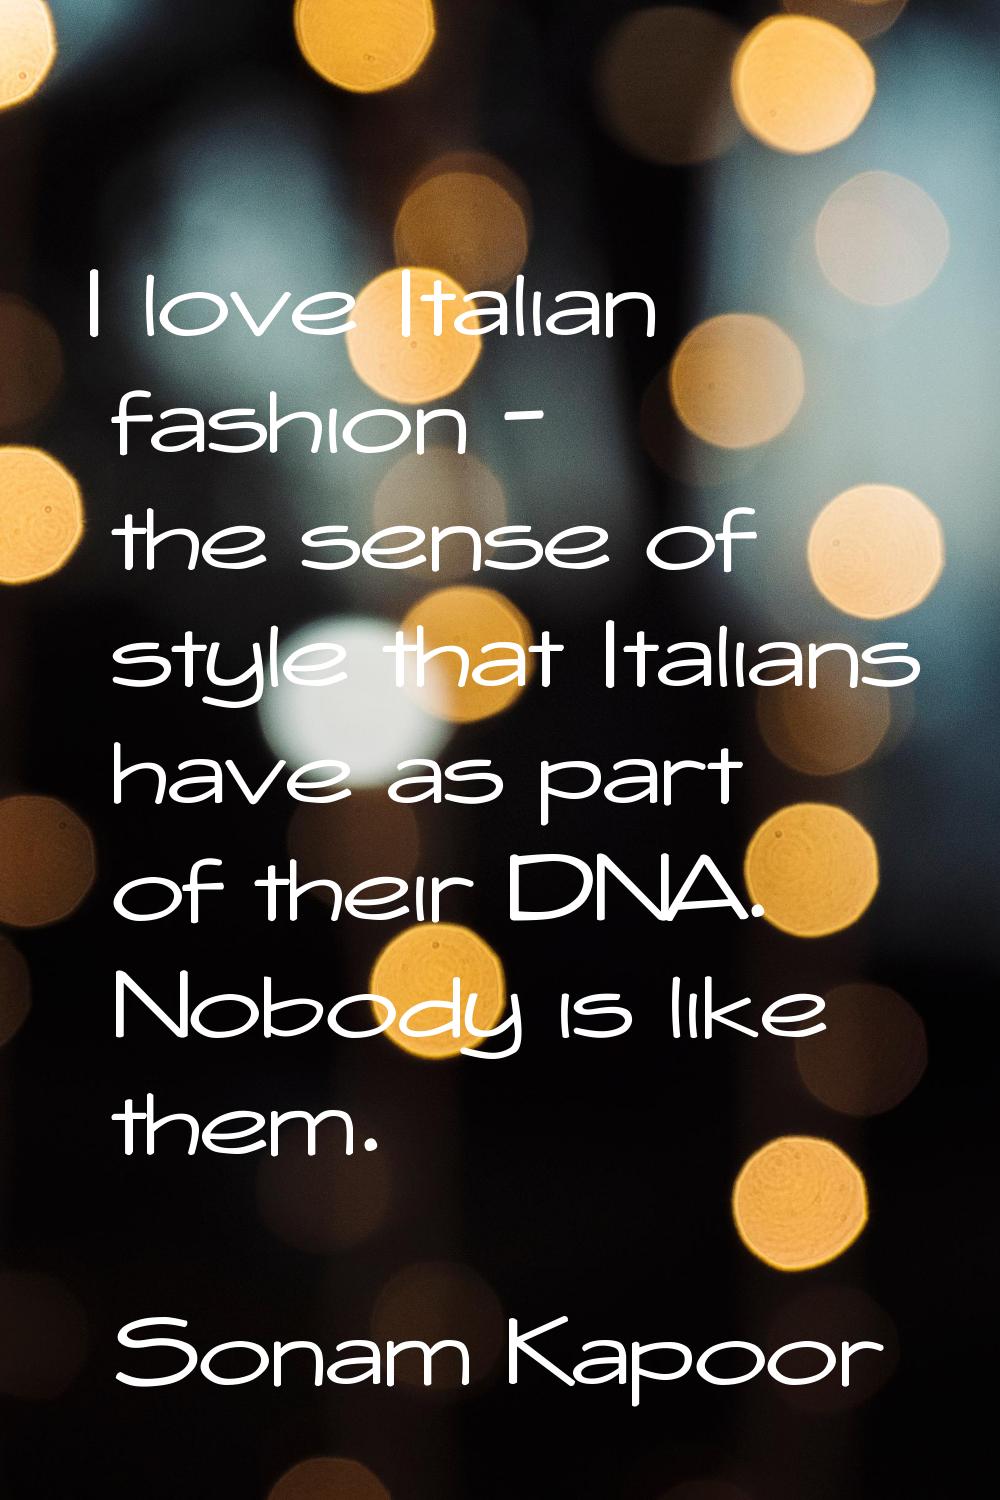 I love Italian fashion - the sense of style that Italians have as part of their DNA. Nobody is like